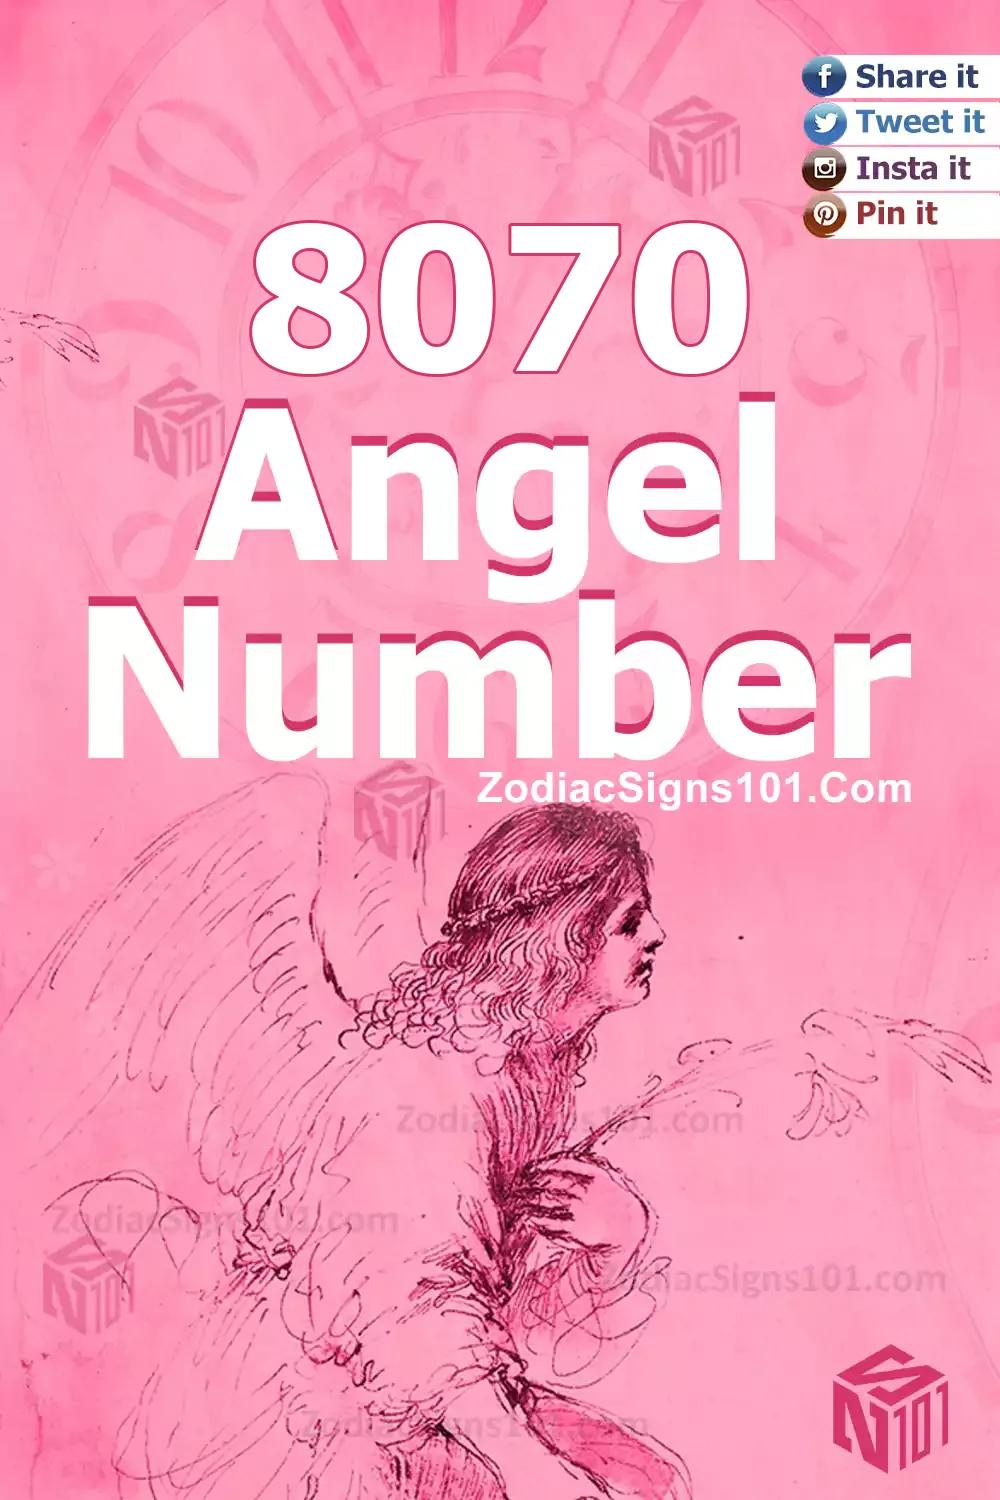 8070 Angel Number Meaning